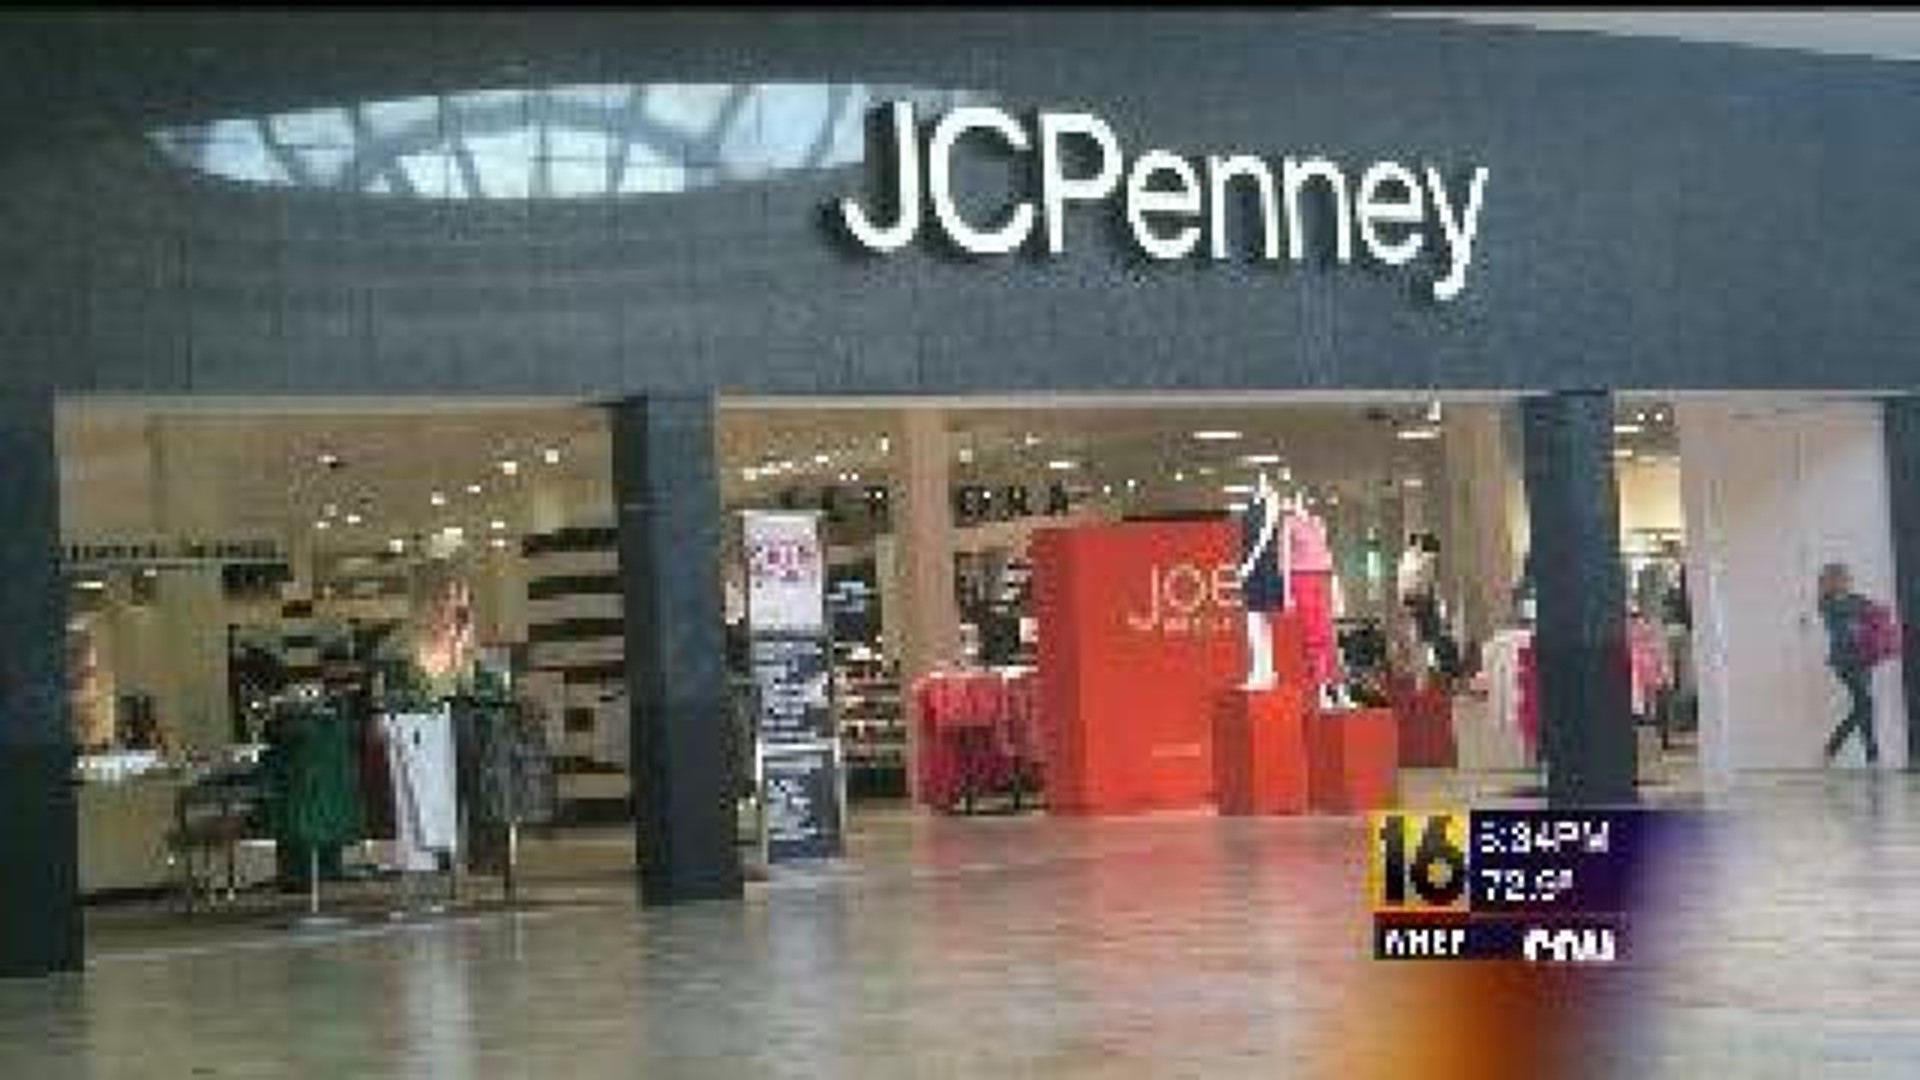 HIDDEN CAMERA: JC Penney Marks Up Prices, Then Holds “Sale”